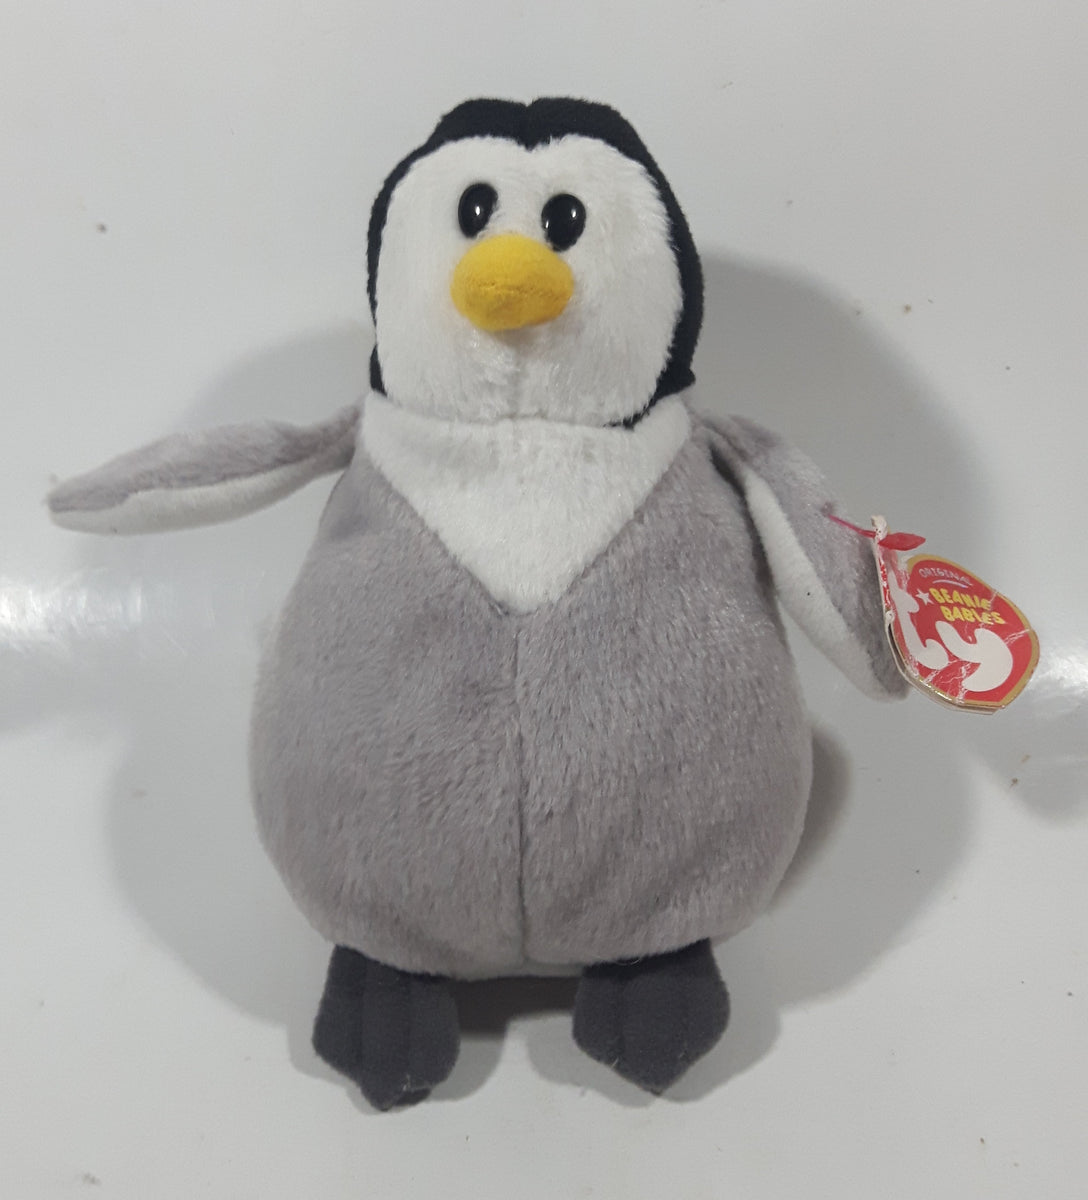 2006 Ty Beannie Babies Slapshot Penguin Stuffed Plush Toy with Tags ...